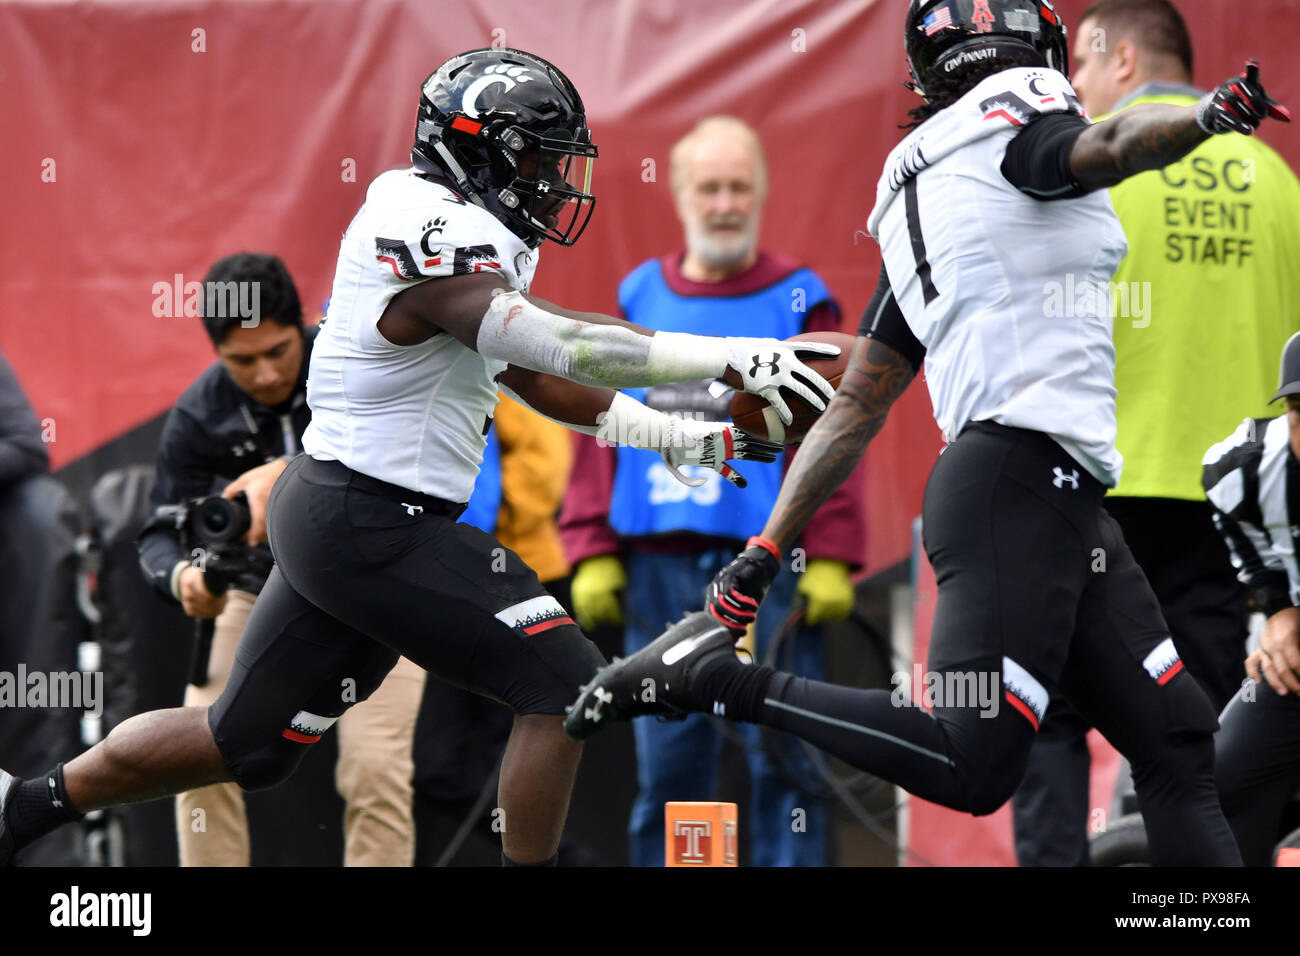 Philadelphia, Pennsylvania, USA. 20th Oct, 2018. Cincinnati Bearcats running back MICHAEL WARREN II (3) scores a rushing touchdown during the American Athletic Conference football game played at Lincoln Financial Field in Philadelphia. Temple leads Cincinnati 10-7 in the first half. Credit: Ken Inness/ZUMA Wire/Alamy Live News Stock Photo